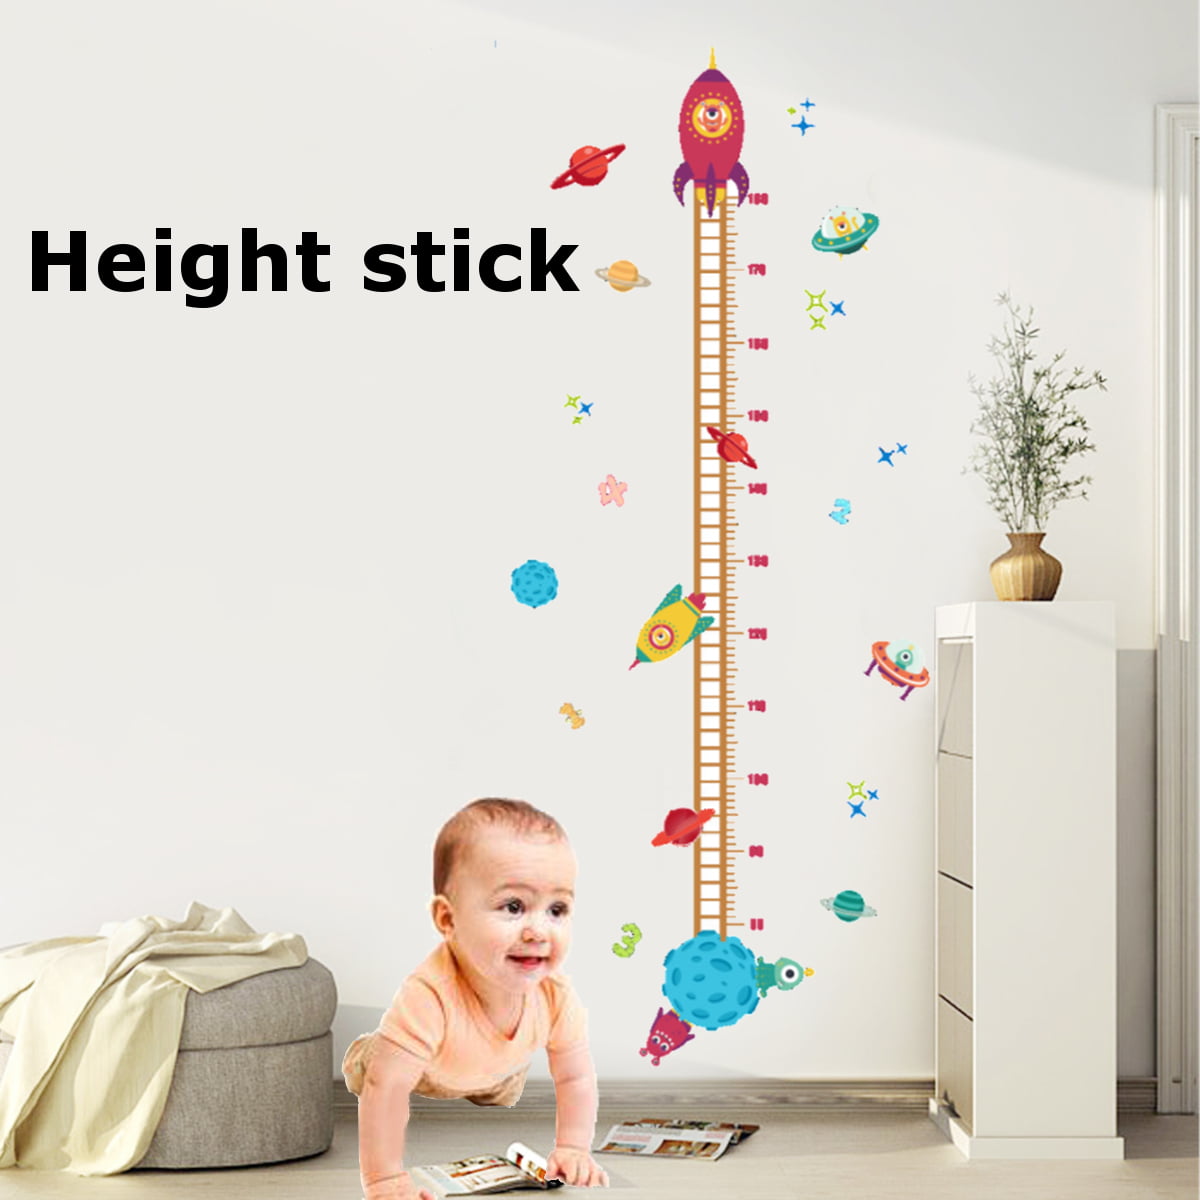 Kids Growth Chart Height Measure Wall Stickers Children Nursery Baby Room Decor 